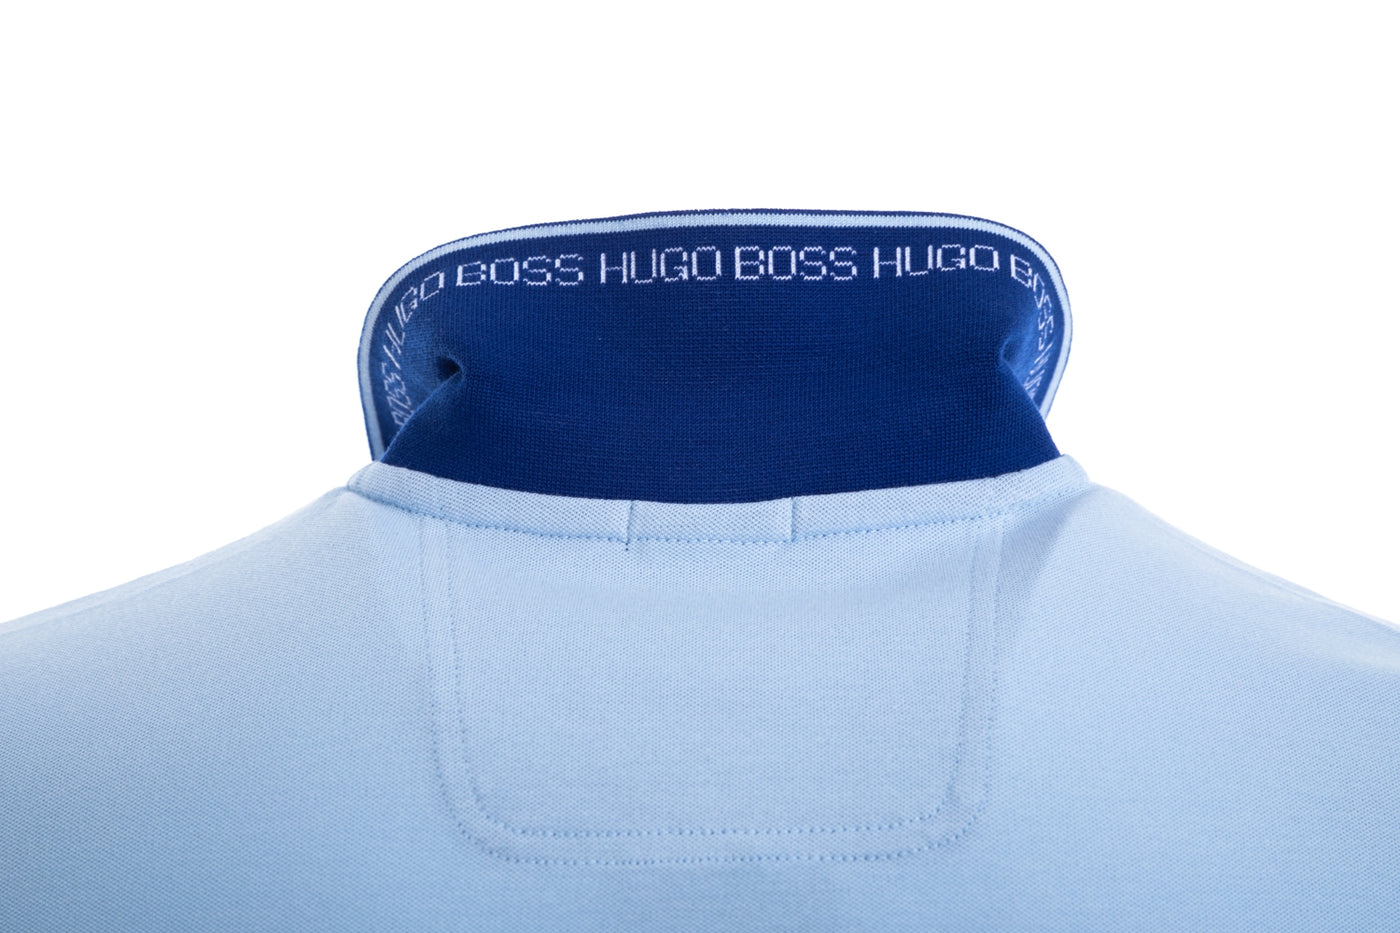 BOSS Paul Curved Polo Shirt in Sky Blue